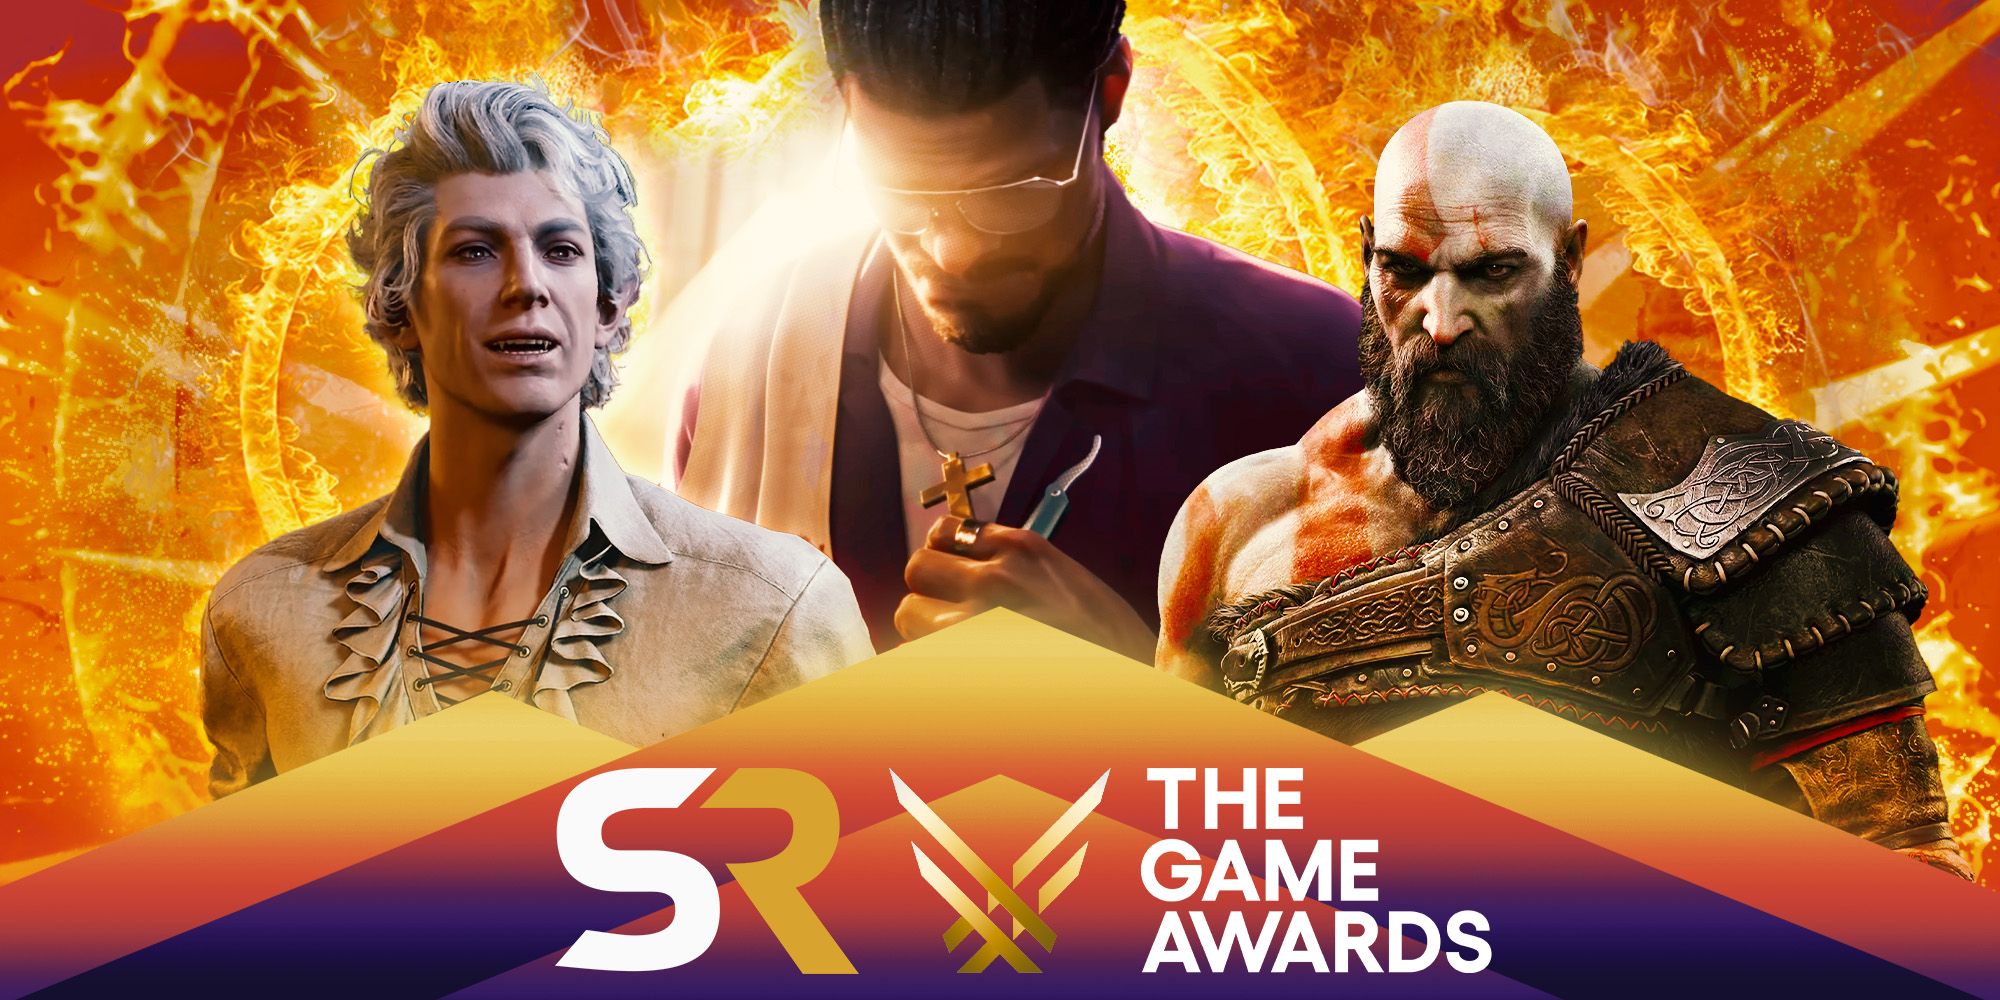  Astarion from Baldur's Gate 3, Kratos from God of War Ragnarok and Blade from the TGA trailer. In front are the SR and The Game Awards logos.